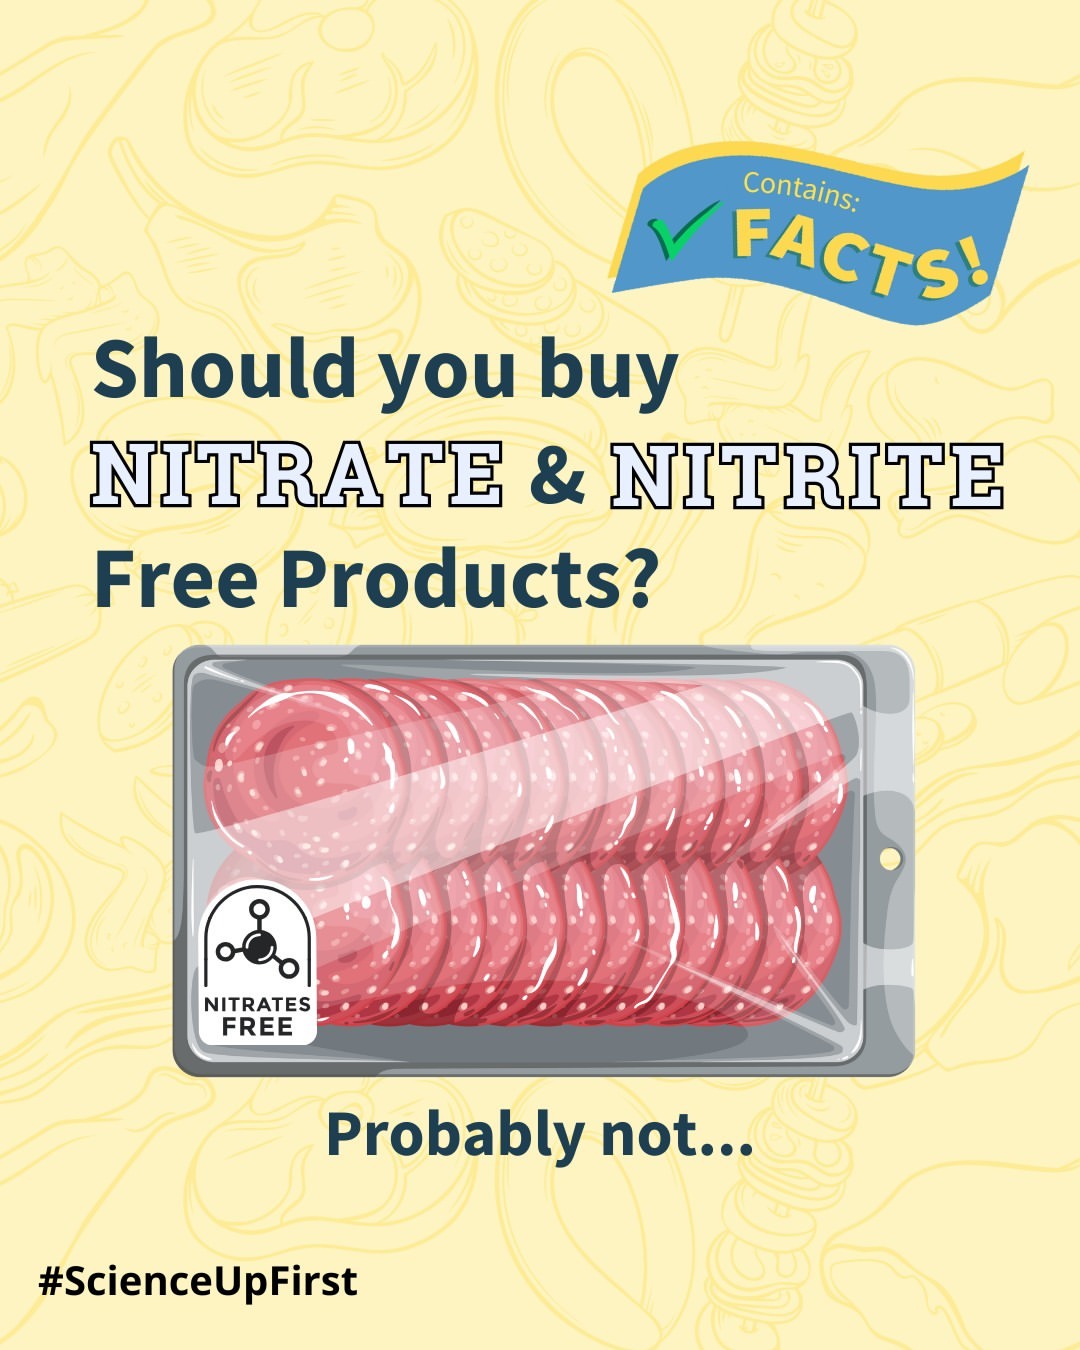 Should you buy nitrate/nitrite free products?